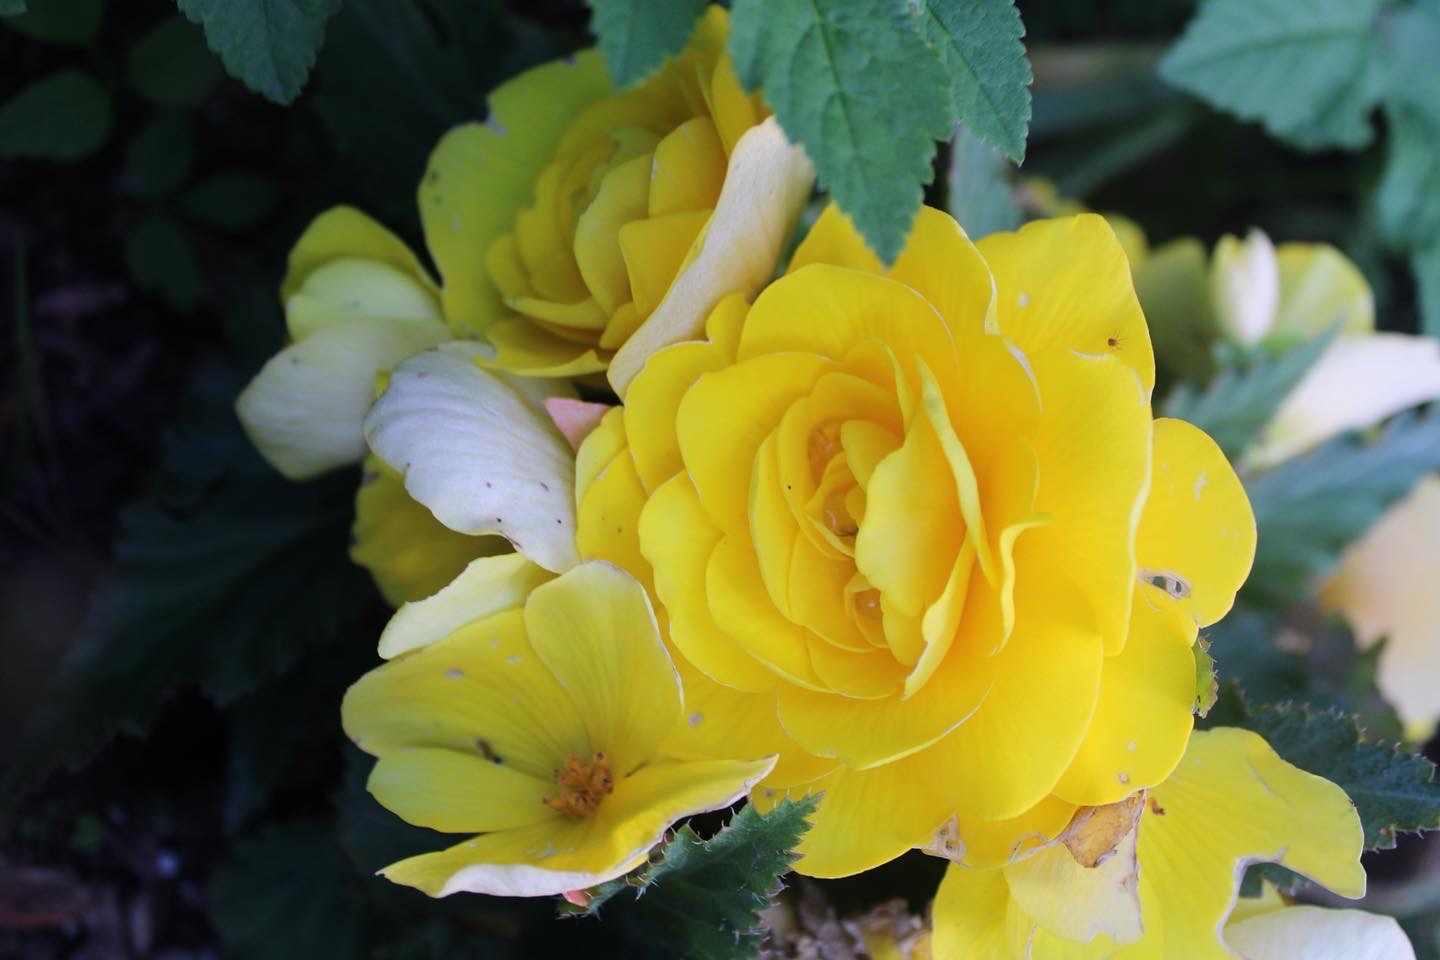 a close-up photo containing yellow roses on a dark background.